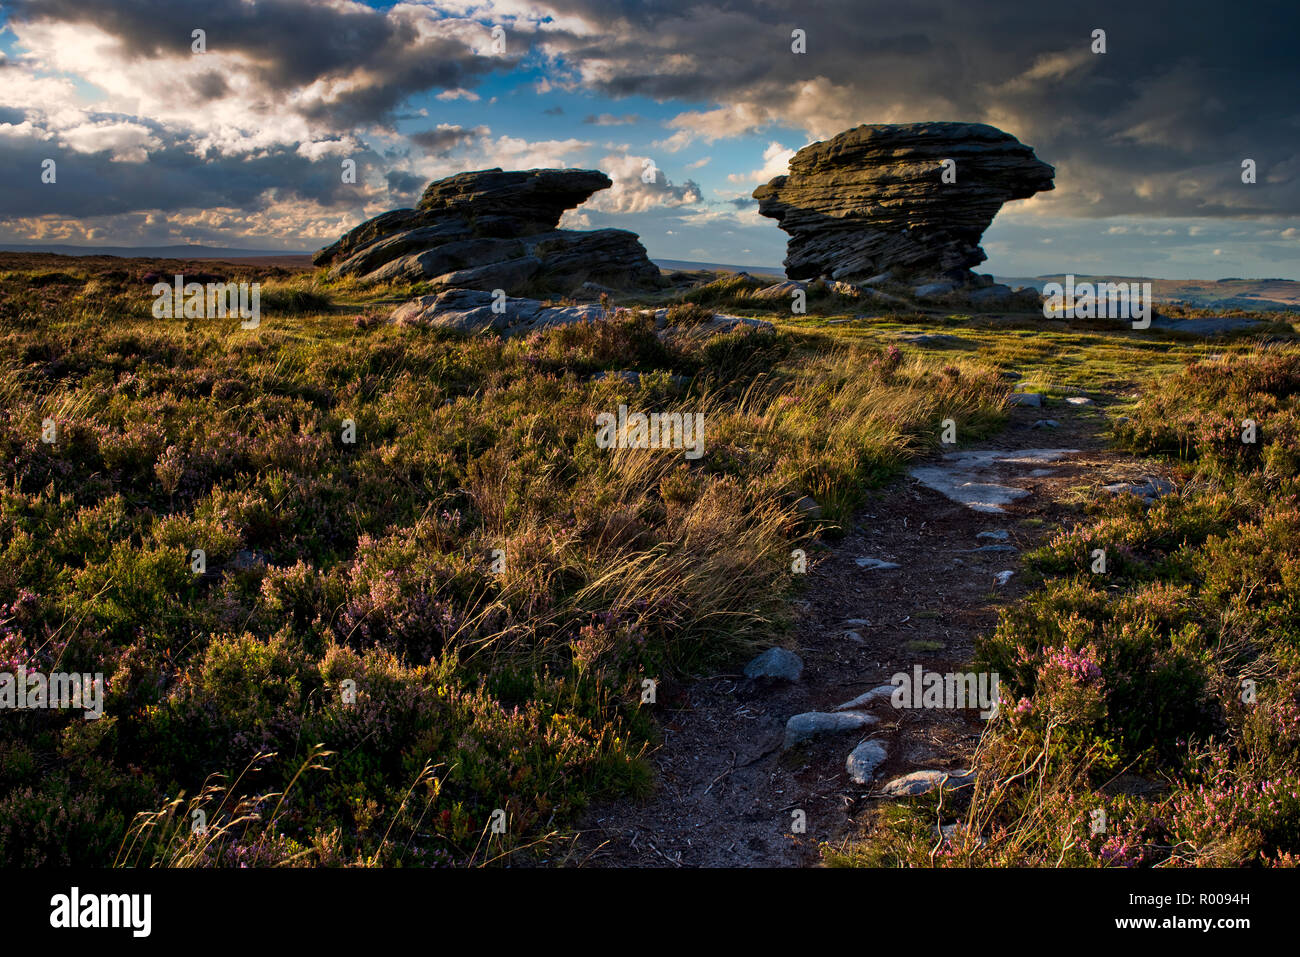 The Ox Stones caught in evening light. Burbage Moor, the Peak District, England  (1) Stock Photo